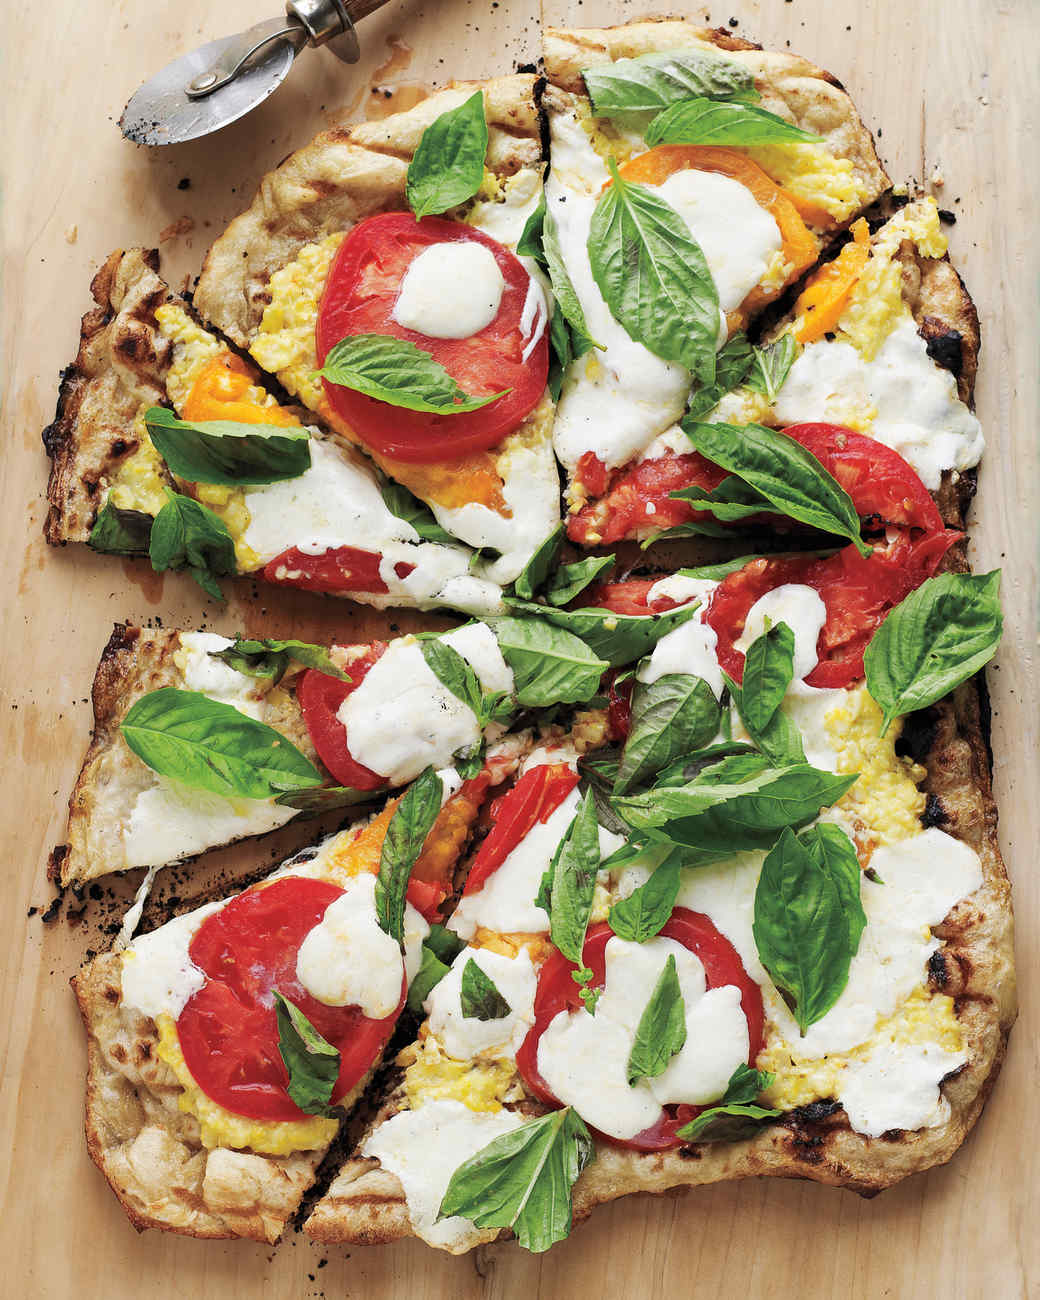 Grilled Pizza Recipes to Make This Summer | Martha Stewart